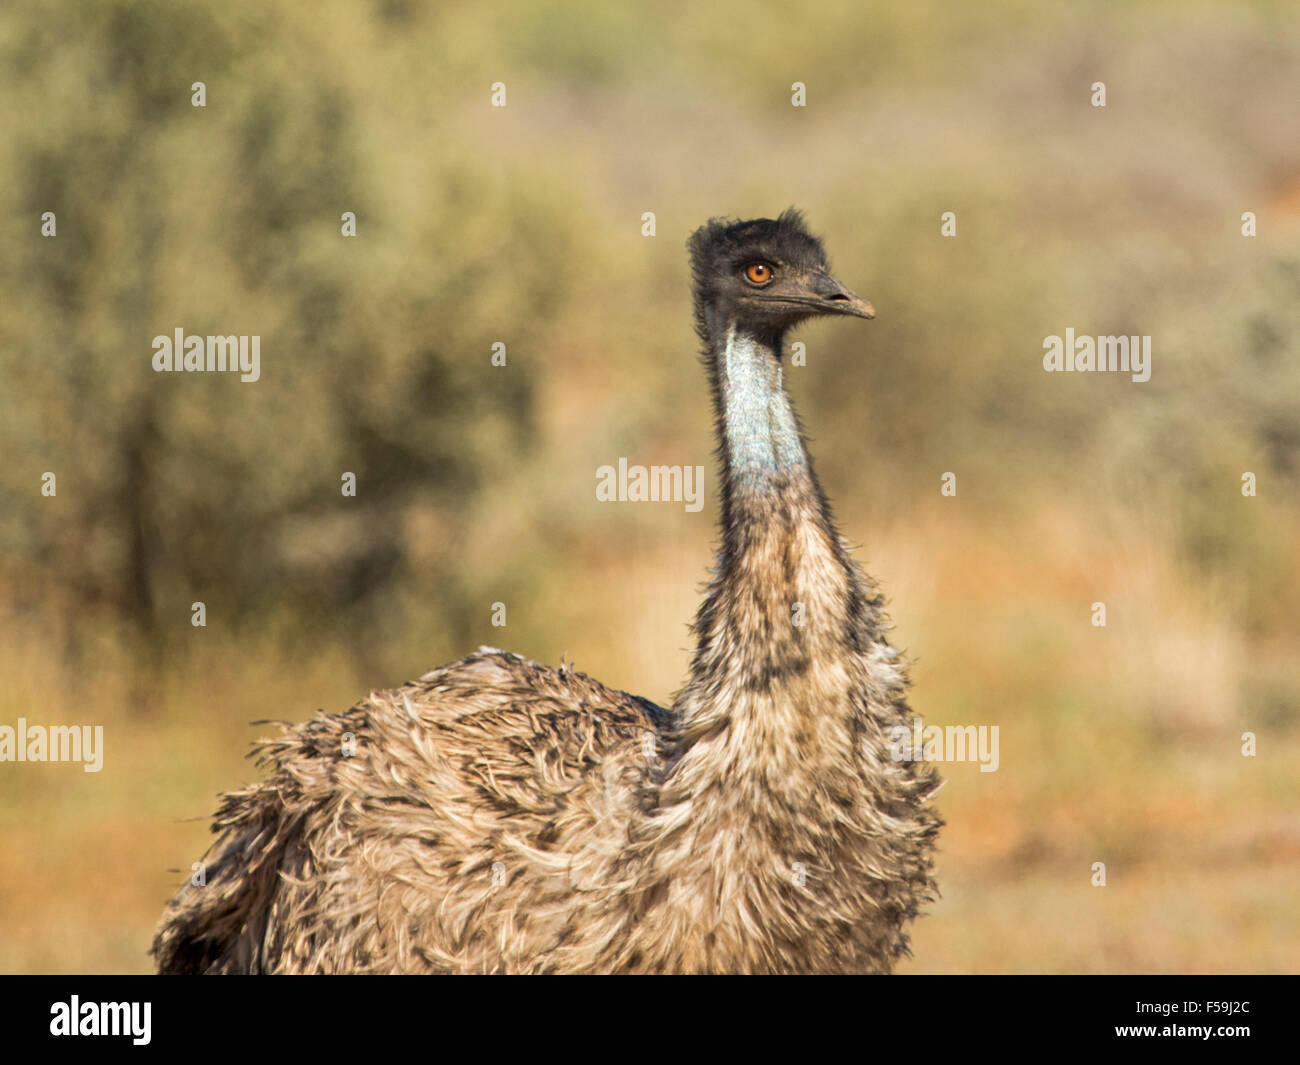 Close-up view / portrait of emu, head, neck, face & eye, in the wild in outback Australia Stock Photo